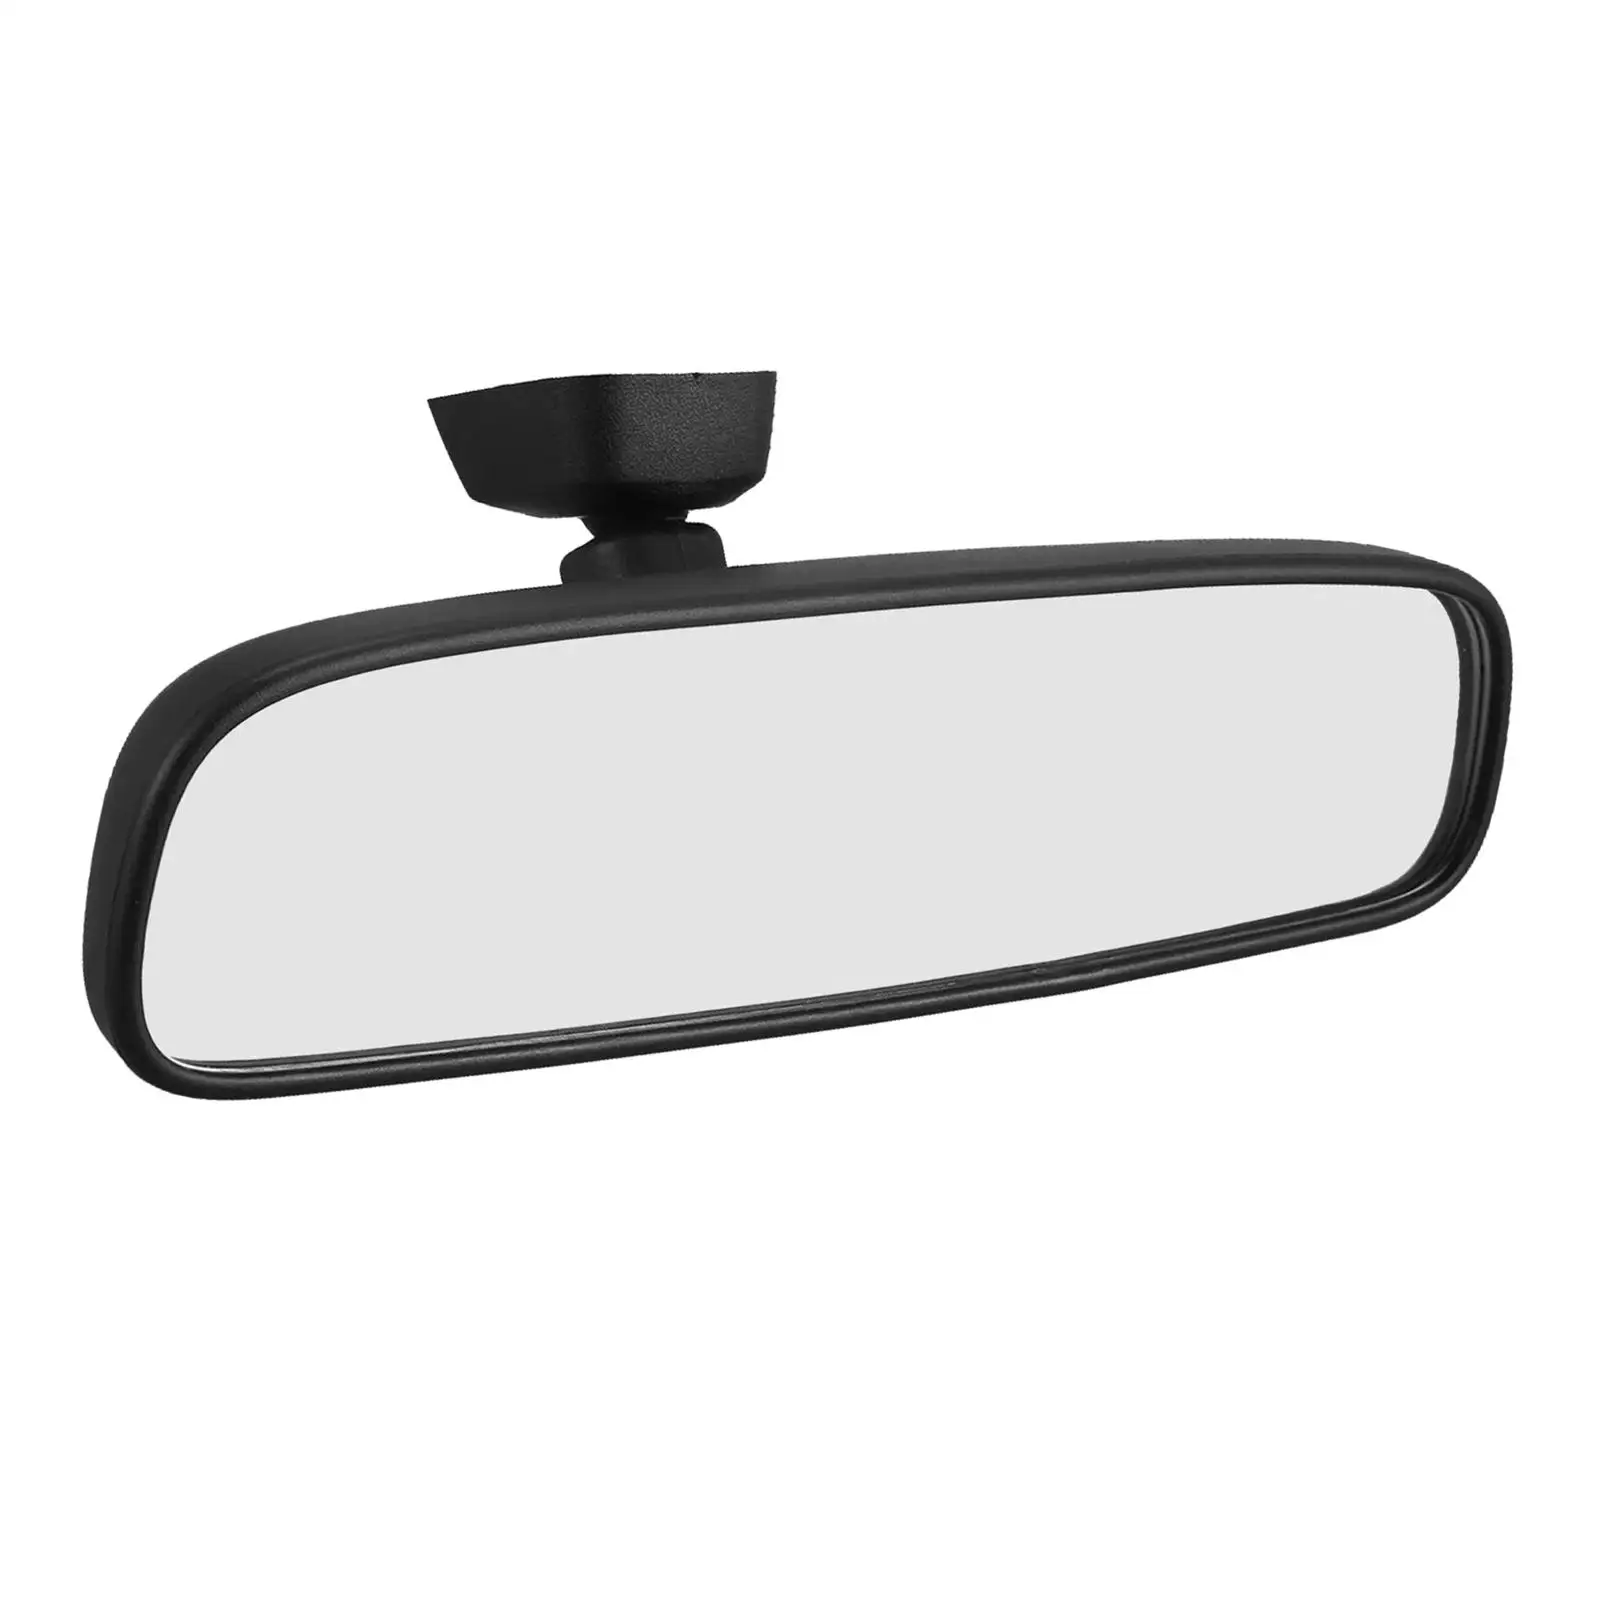 Rear View Mirror 76400-sea-014 Easy to Install Replacement Assembly Automotive 76400-sea-305 76400-sea-024 for Accord Cr-